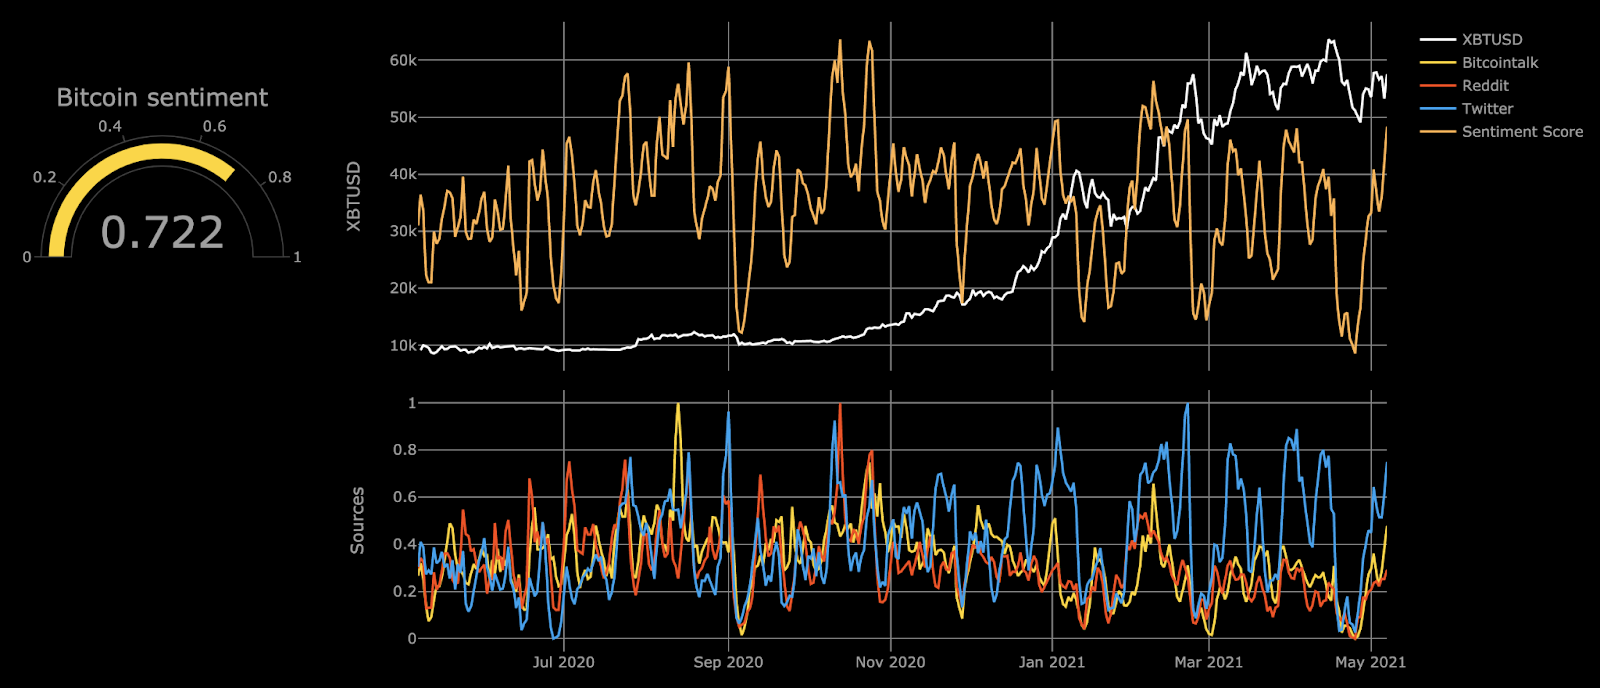 Mining netizen’s opinion on cryptocurrency: sentiment analysis of Twitter data